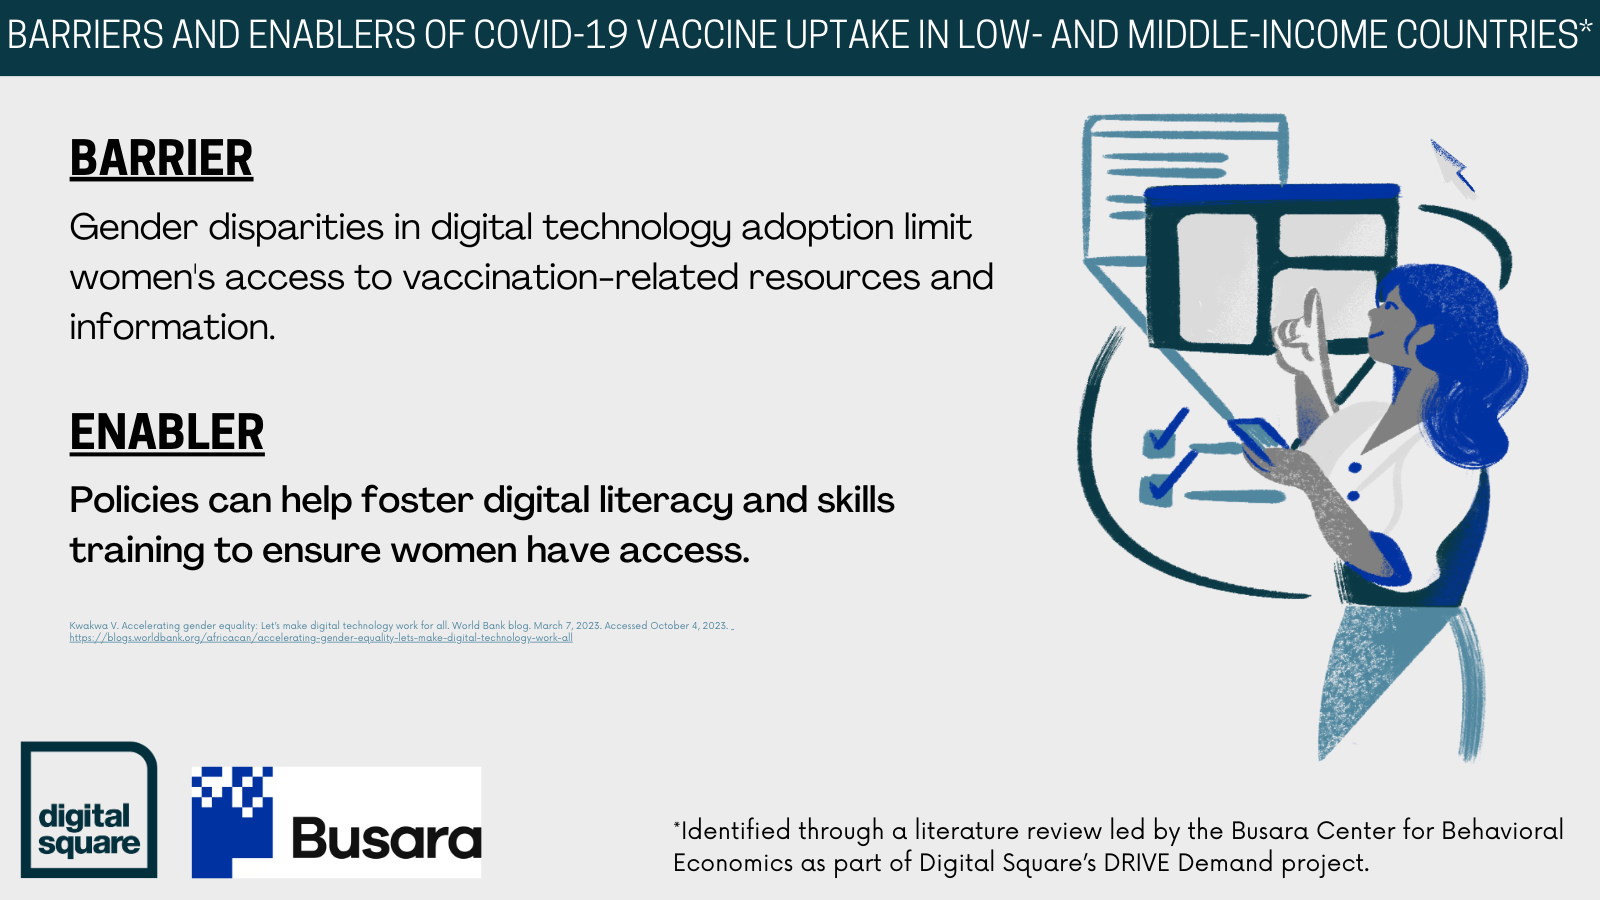  Sample tweet:  Did you know? Improving digital literacy among women can help increase vaccination coverage in LMICs. Learn more:    https://ow.ly/QlTi50QeyY8    #digitalhealth #VaccinesWork @DigitalSQR @BusaraCenter  